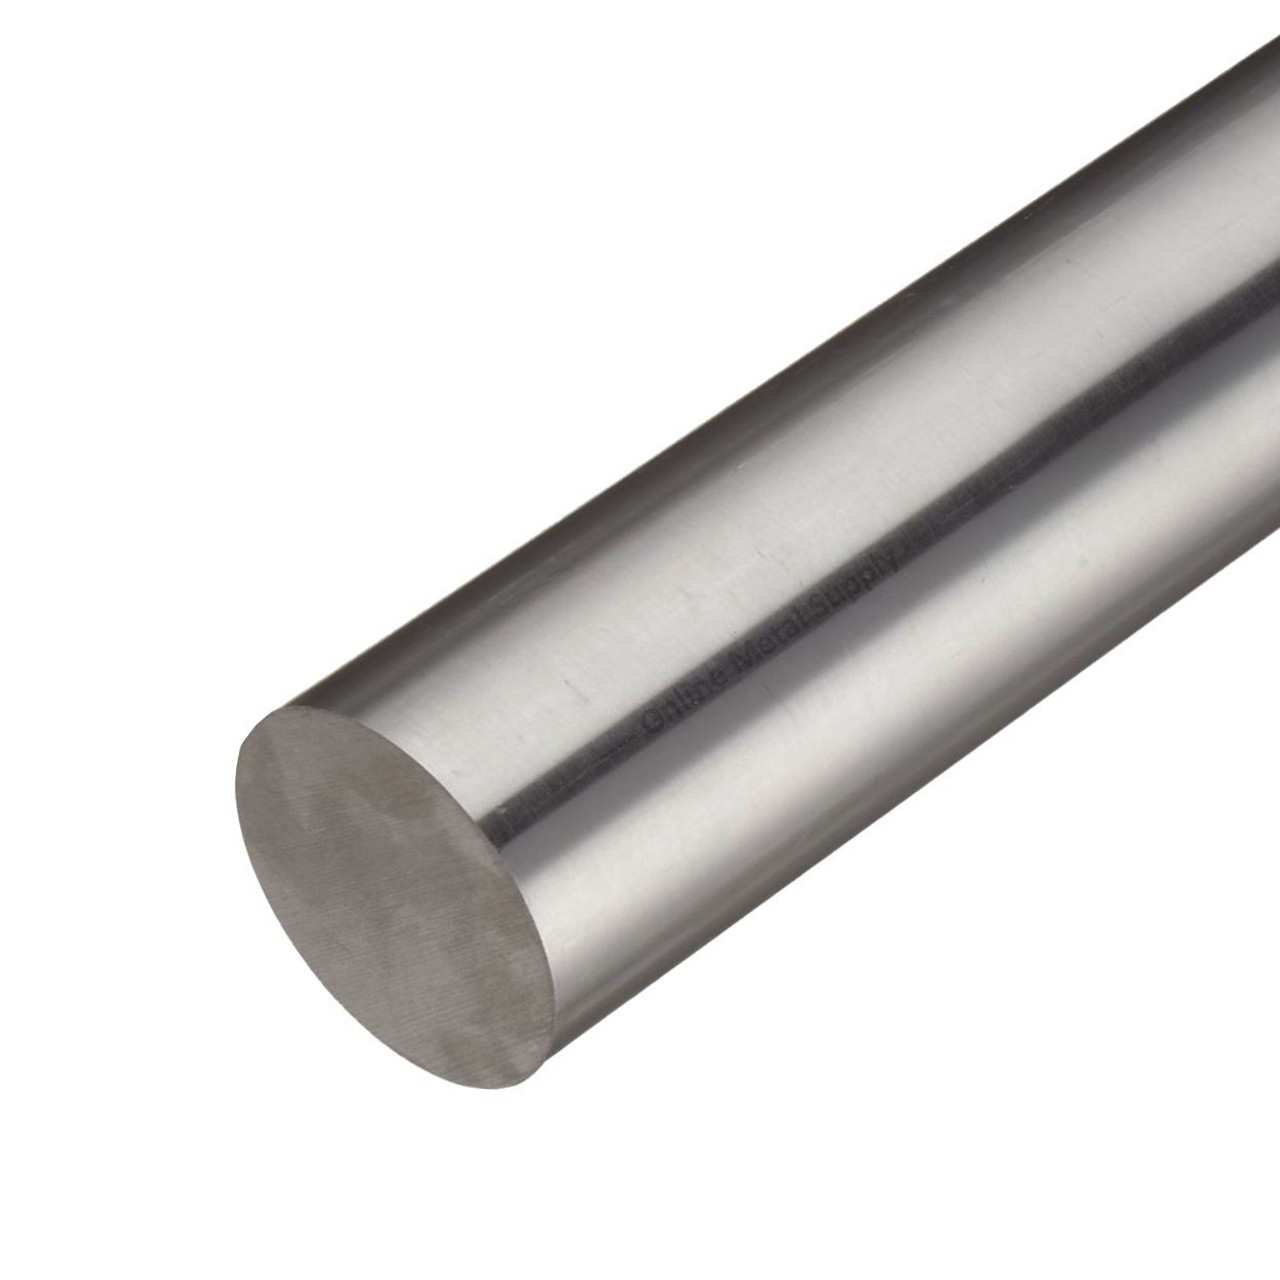 1.750 (1-3/4 inch) x 17 inches, 15-5 Cond A Stainless Steel Round Rod, Cold Finished